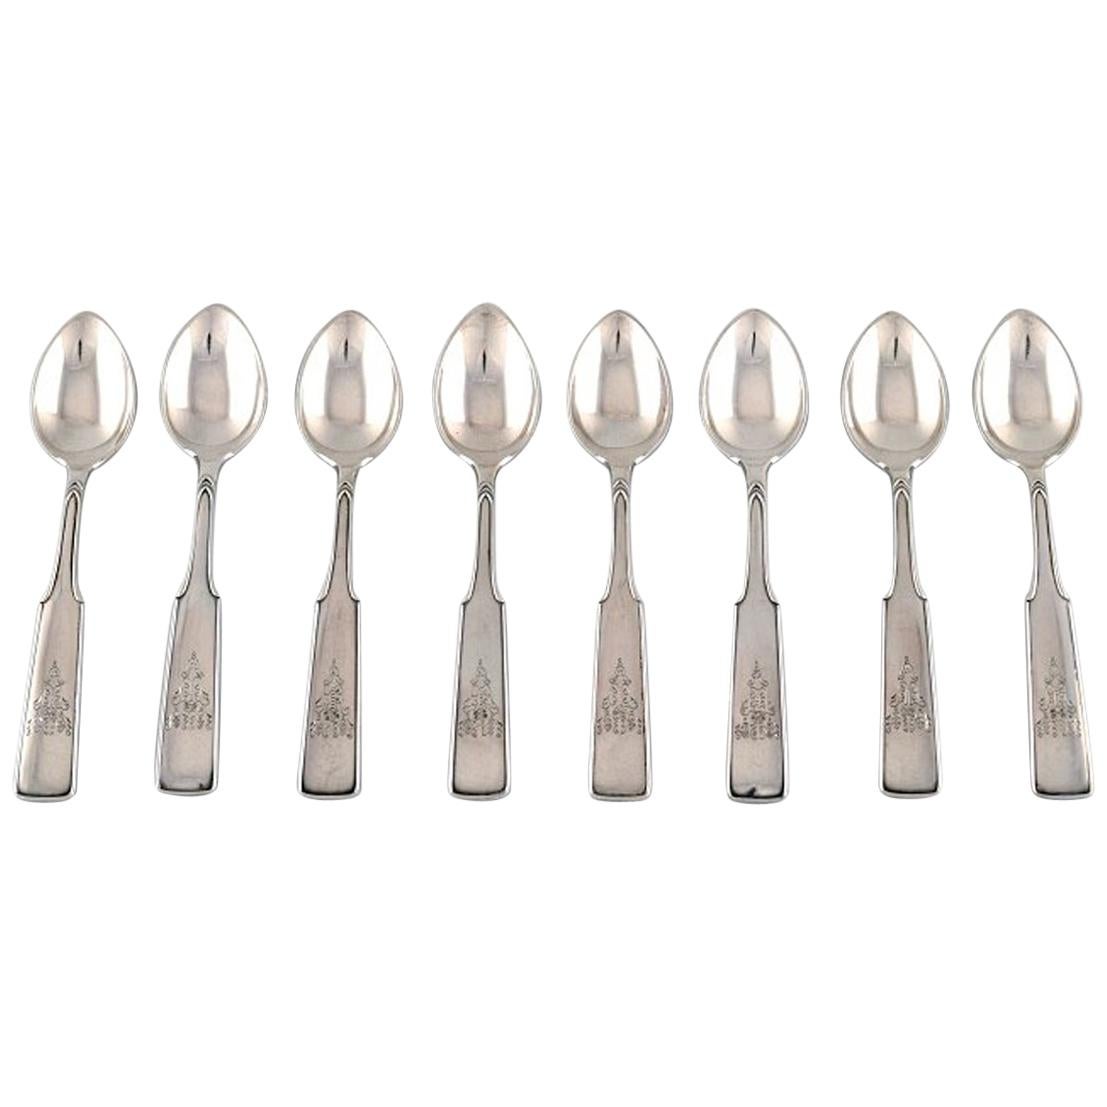 Hans Hansen Silverware Number 2, Set of 8 Coffee Spoons in All Silver, 1937 For Sale